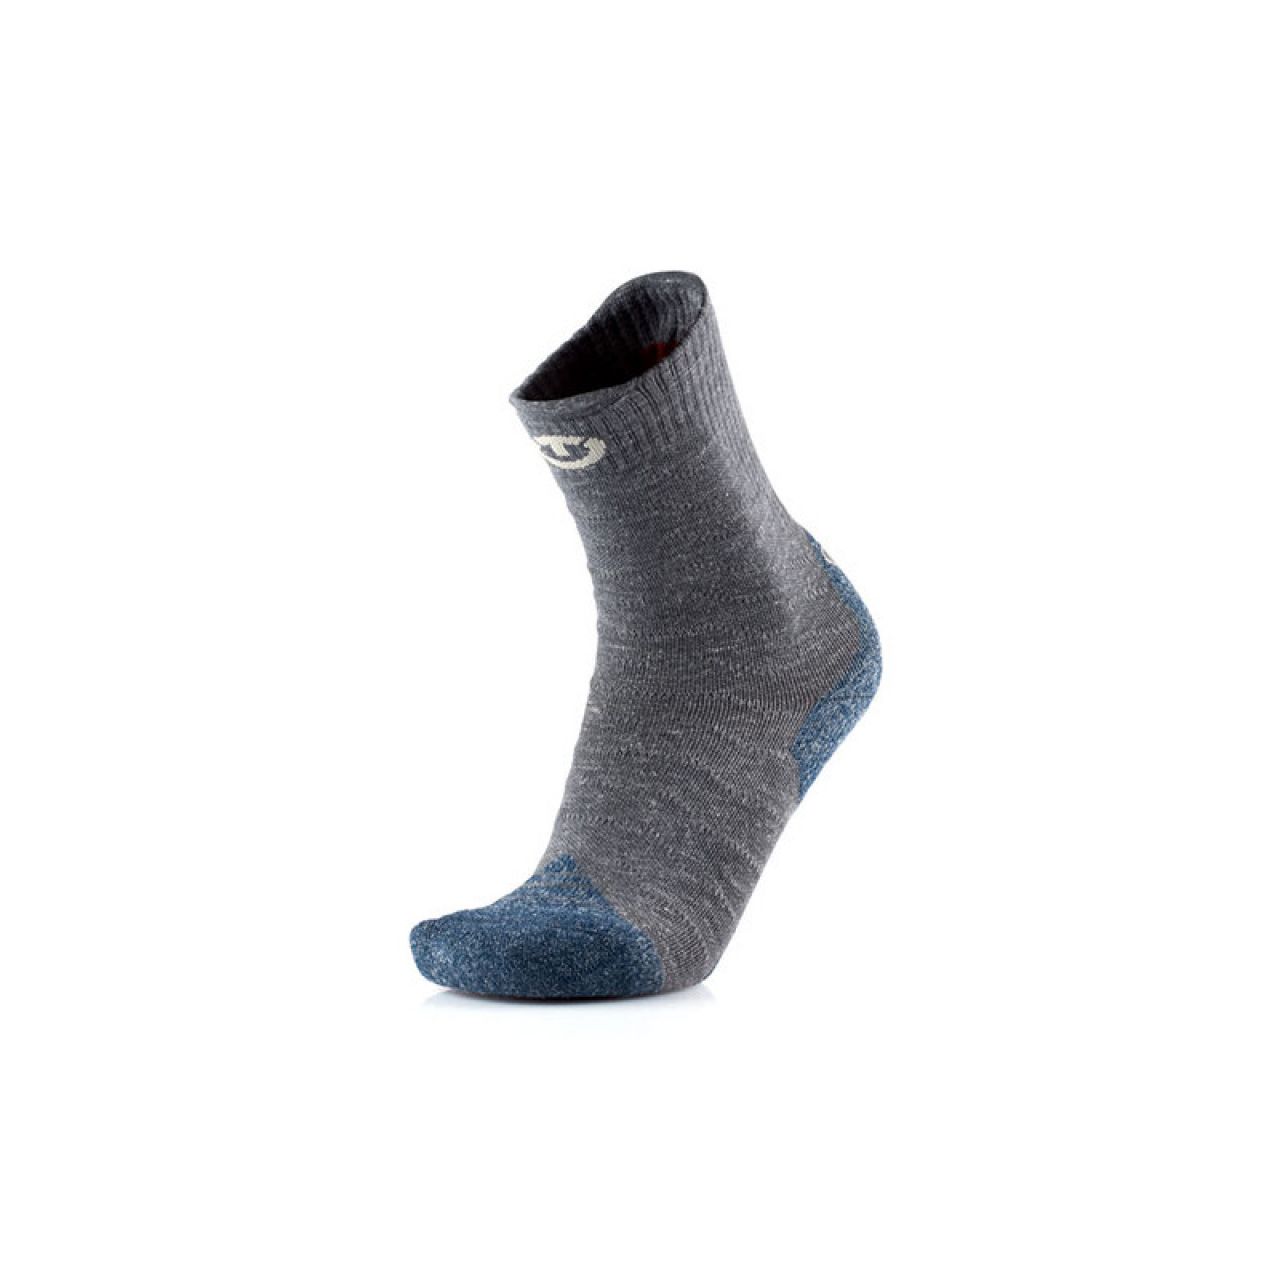 THERMIC CHAUSSETTE TREKKING TEMPERATE CREW GRISE chaussette trekking